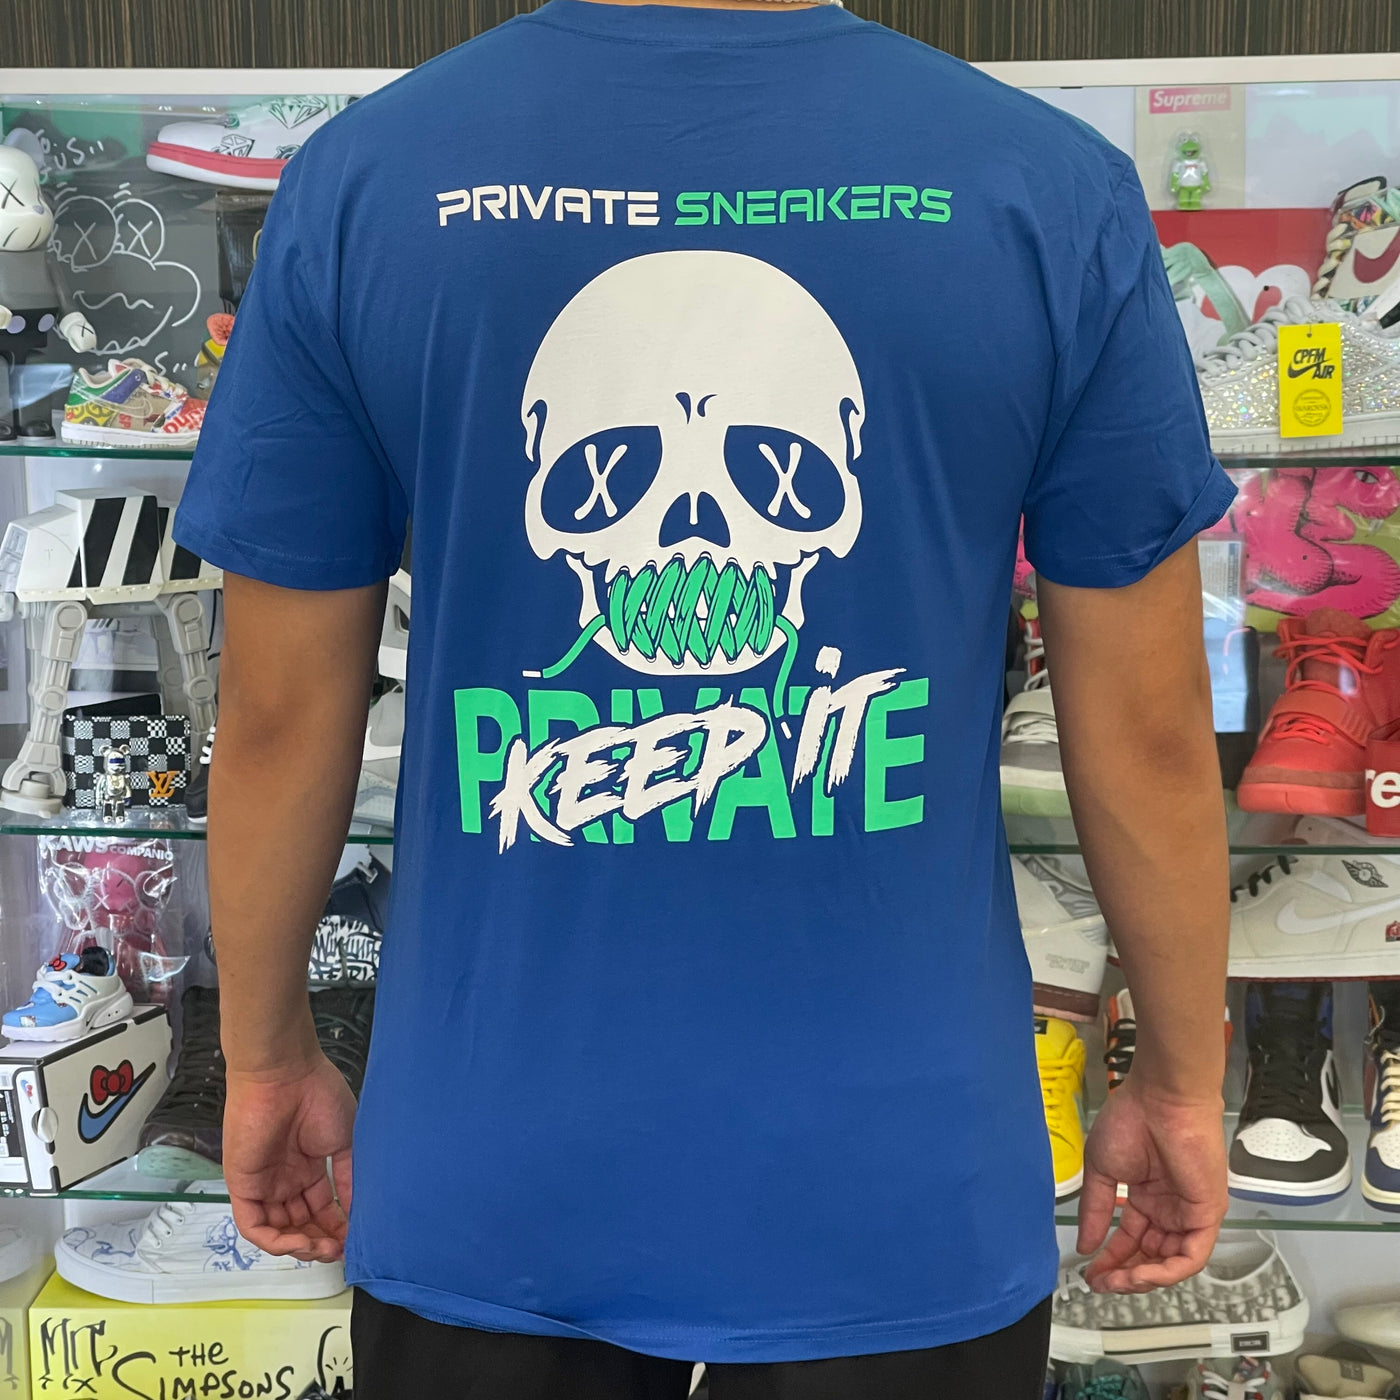 Private Sneakers Keep It Private T-Shirt Bright Royal